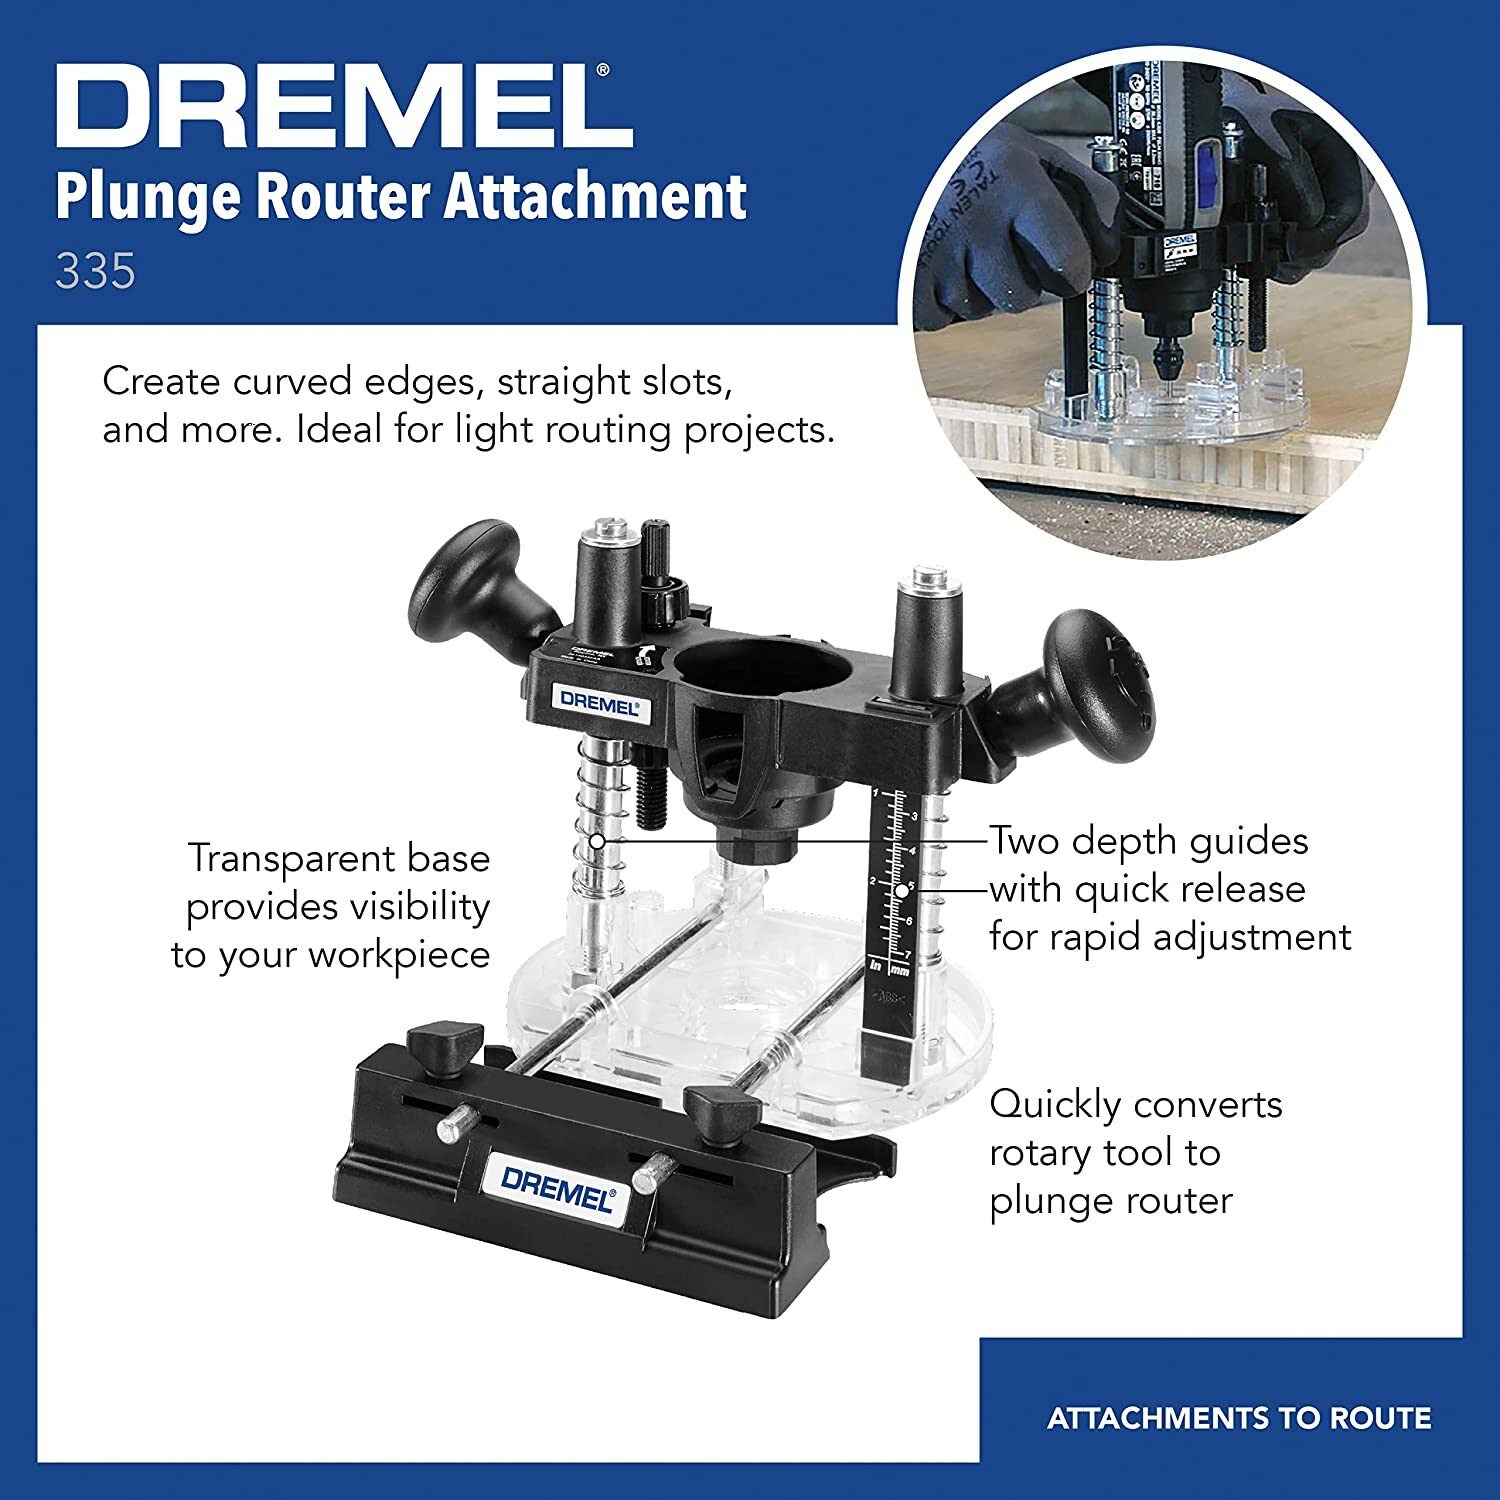 Dremel 3000-1/25 Variable Speed Rotary Tool Kit- 1 Attachment and 25  Accessories- Grinder, Mini Sander, Polisher, Router, Engraver- Perfect for  Routing, Metal Cutting, Wood Carving, Polishing 